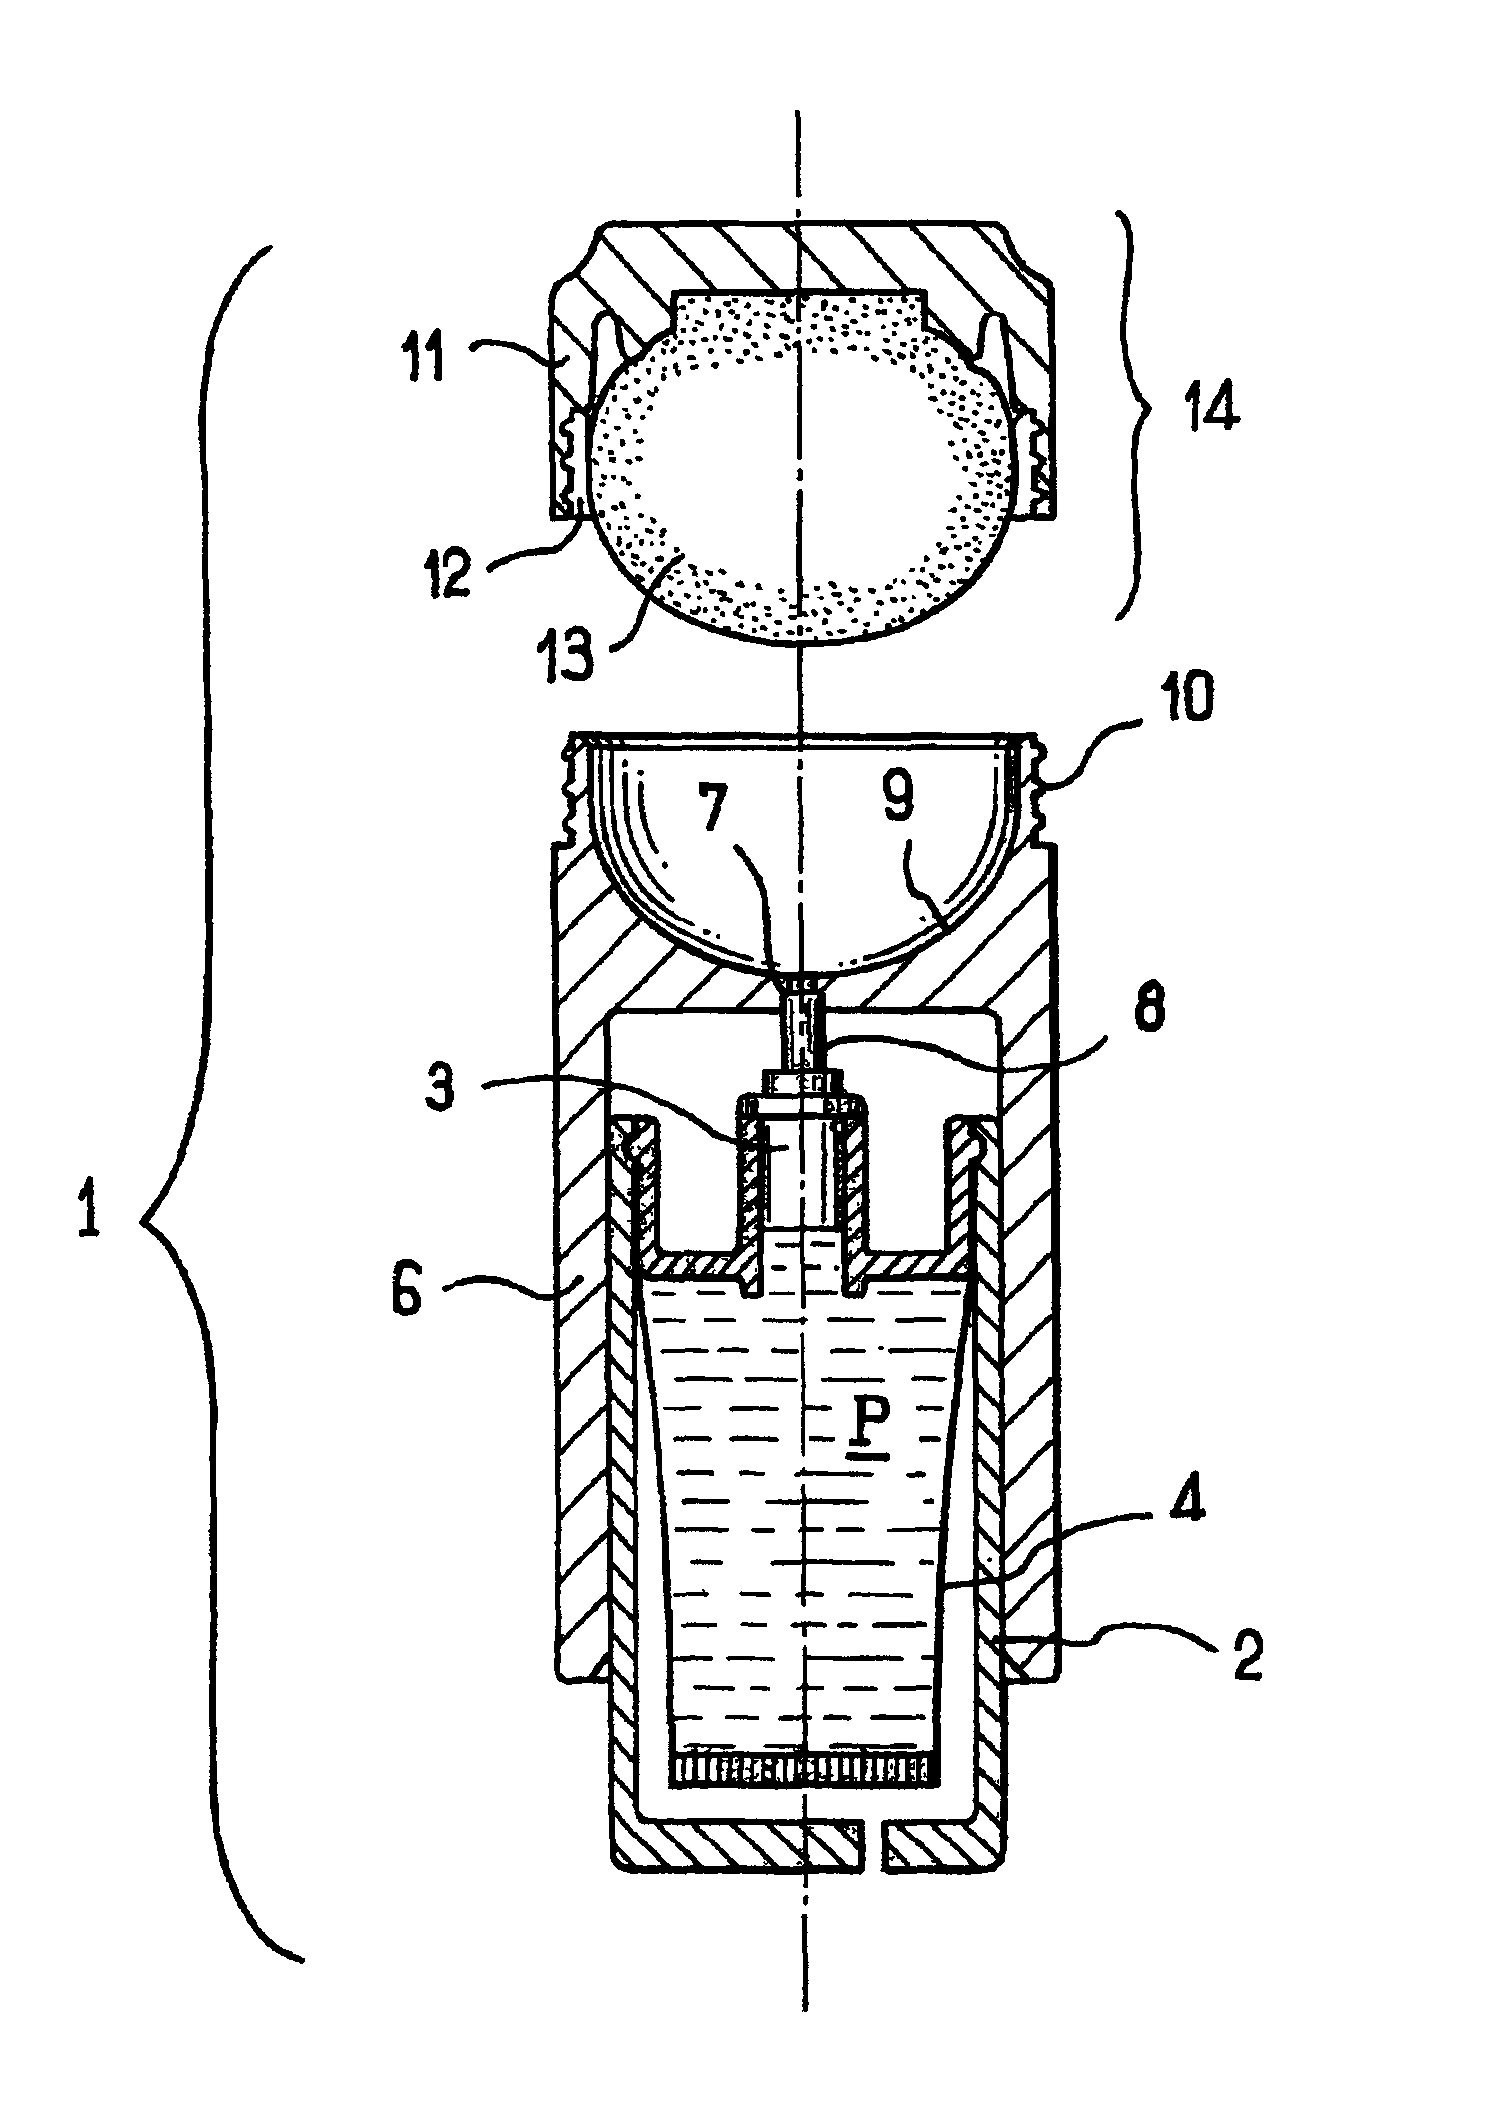 Device having a magnetic applicator and/or wiper member